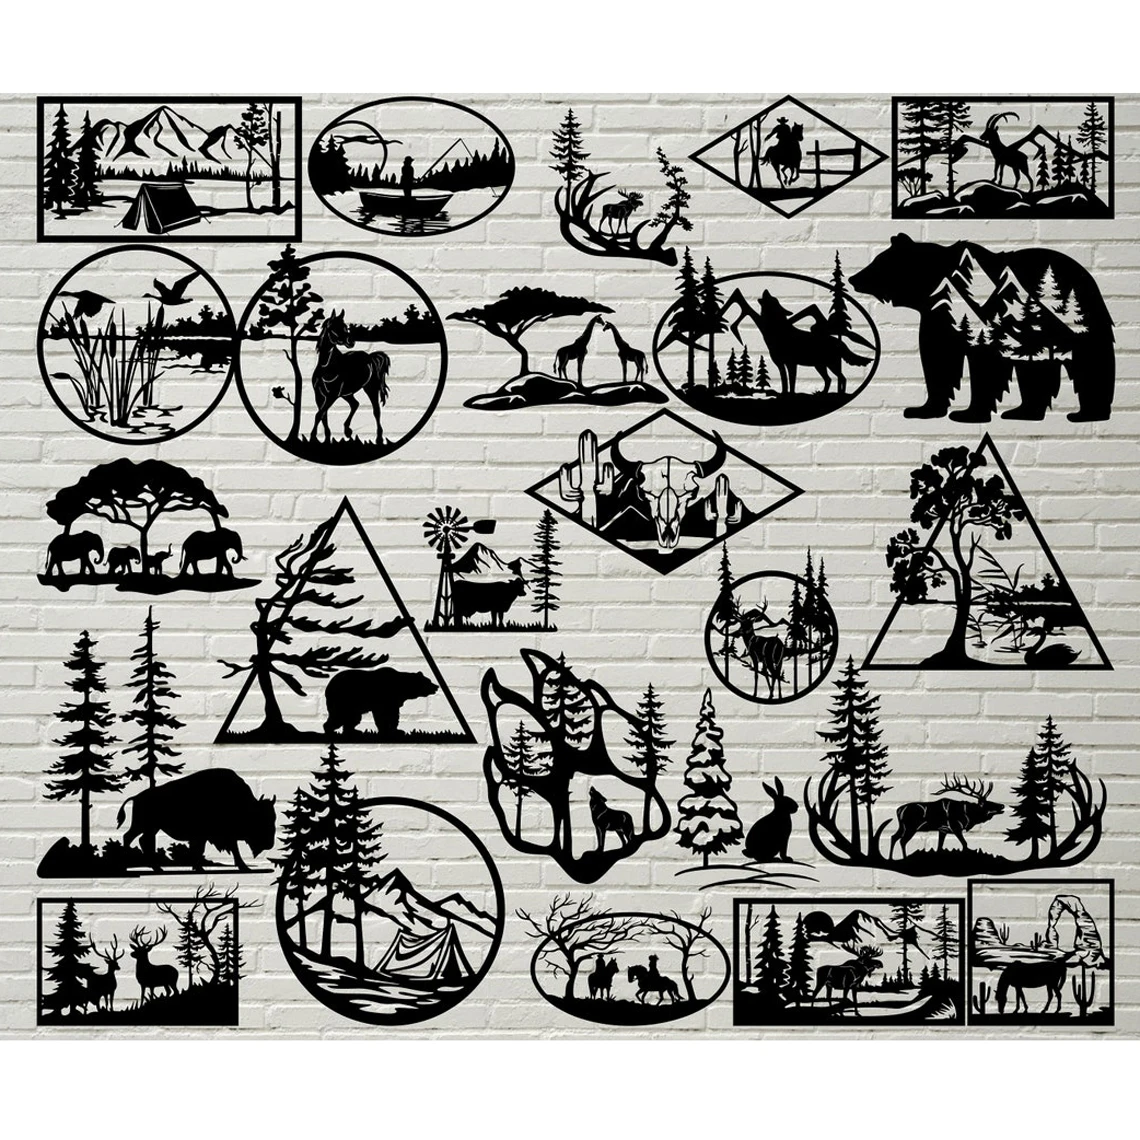 wood locator 50 Wildlife Stencil Décor Design Templates DXF, SVG, PNG Files for Laser/Plasma Cutting and Printing cnc wood router machine